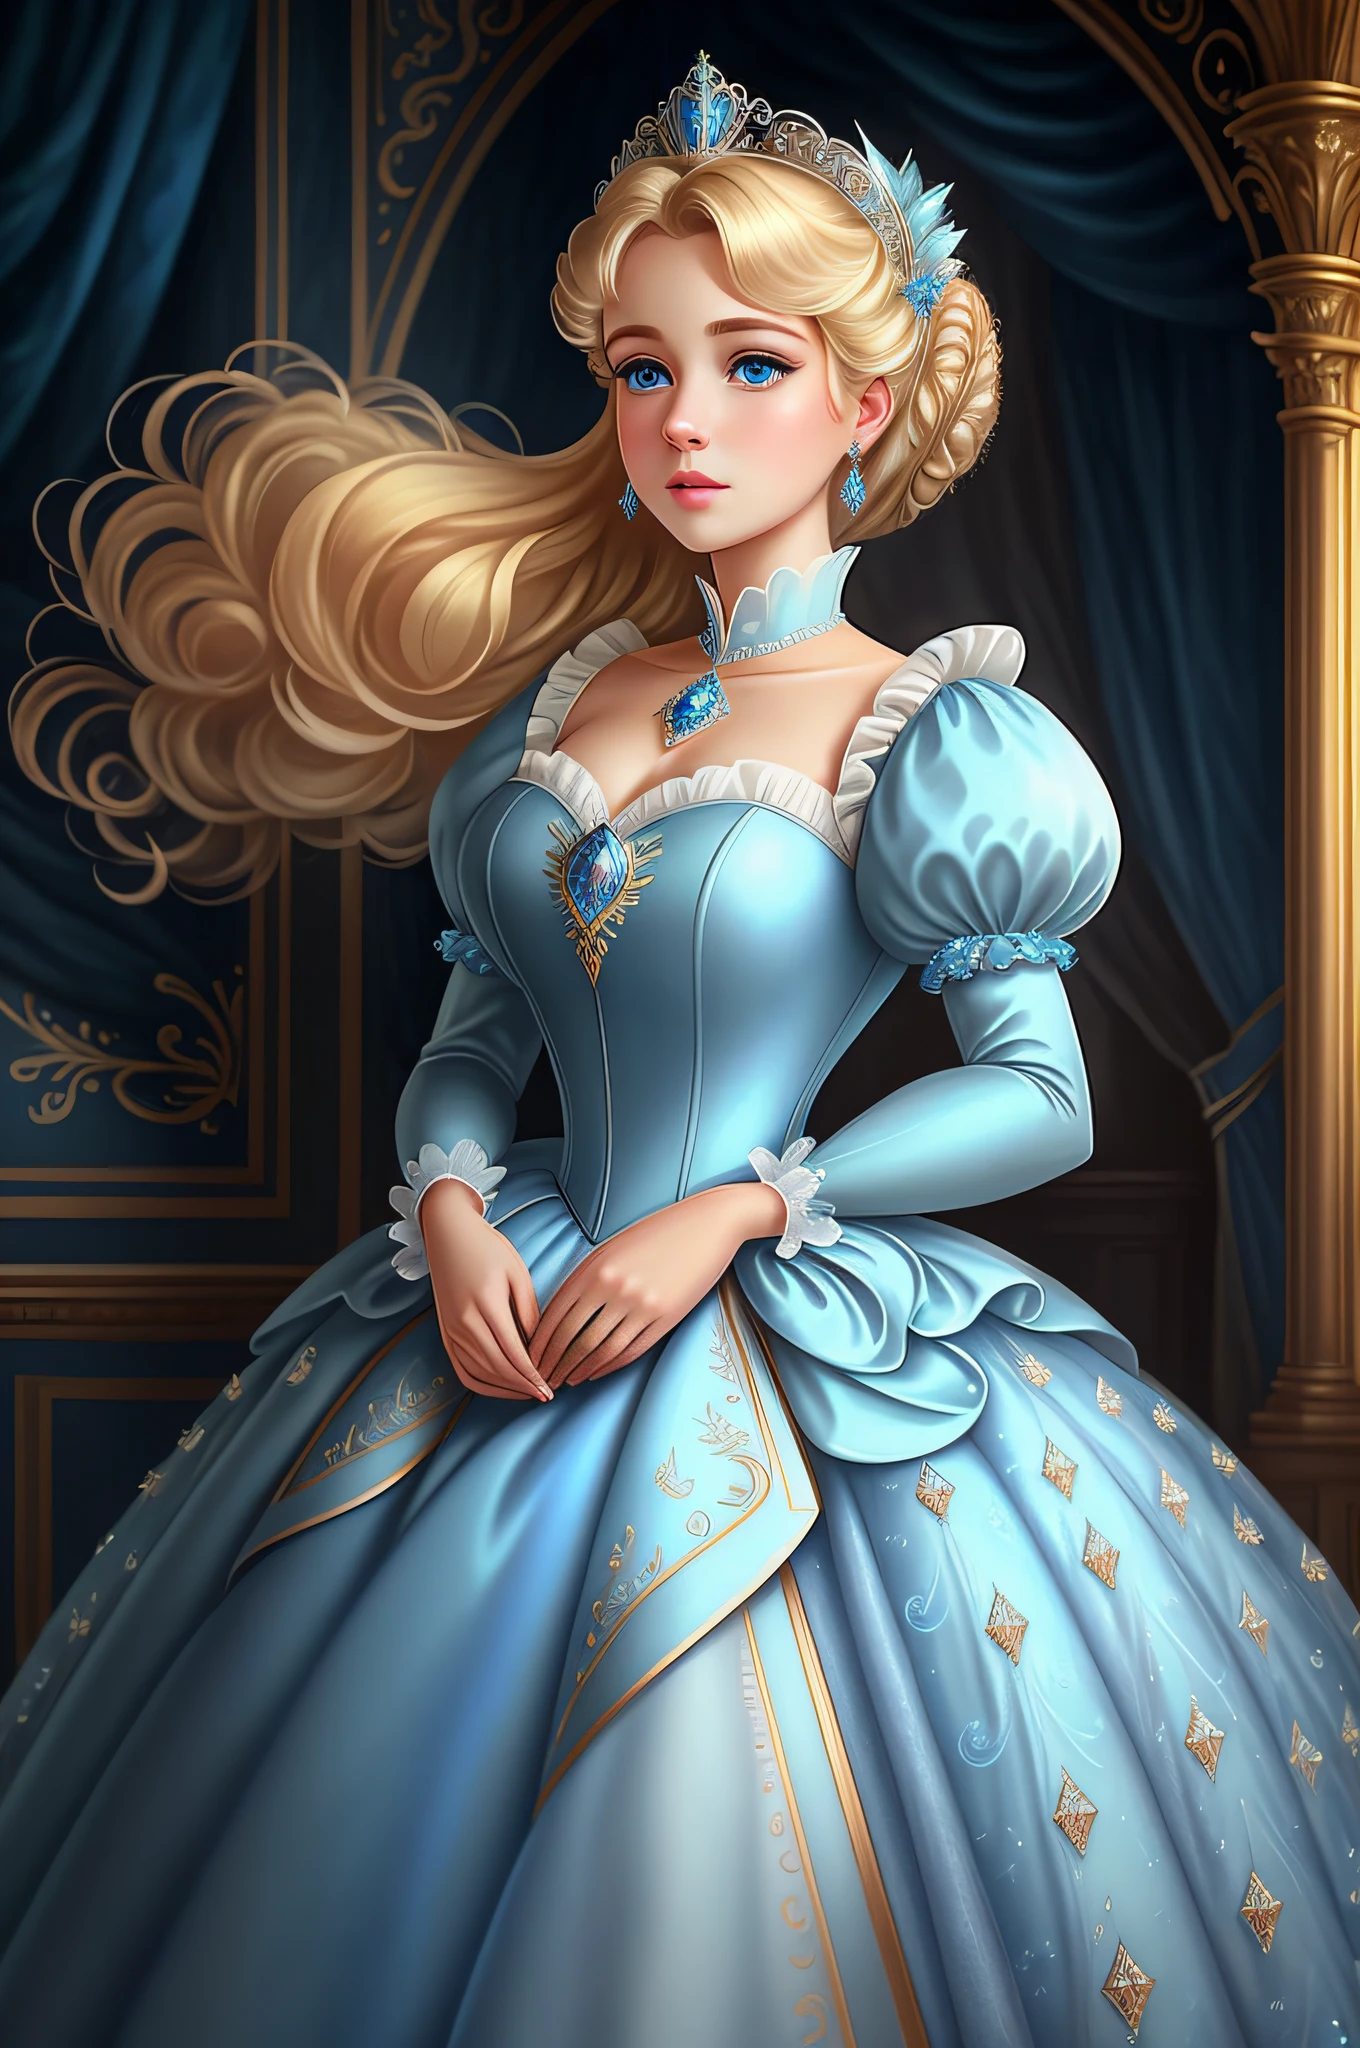 best quality, ((masterpiece)), portrait, Cinderella dressed in a stately and elaborate ballgown with huge puffed sleeves, ((perfect face)), elaborately curled and styled blonde hair, blue eyes (perfect eyes)